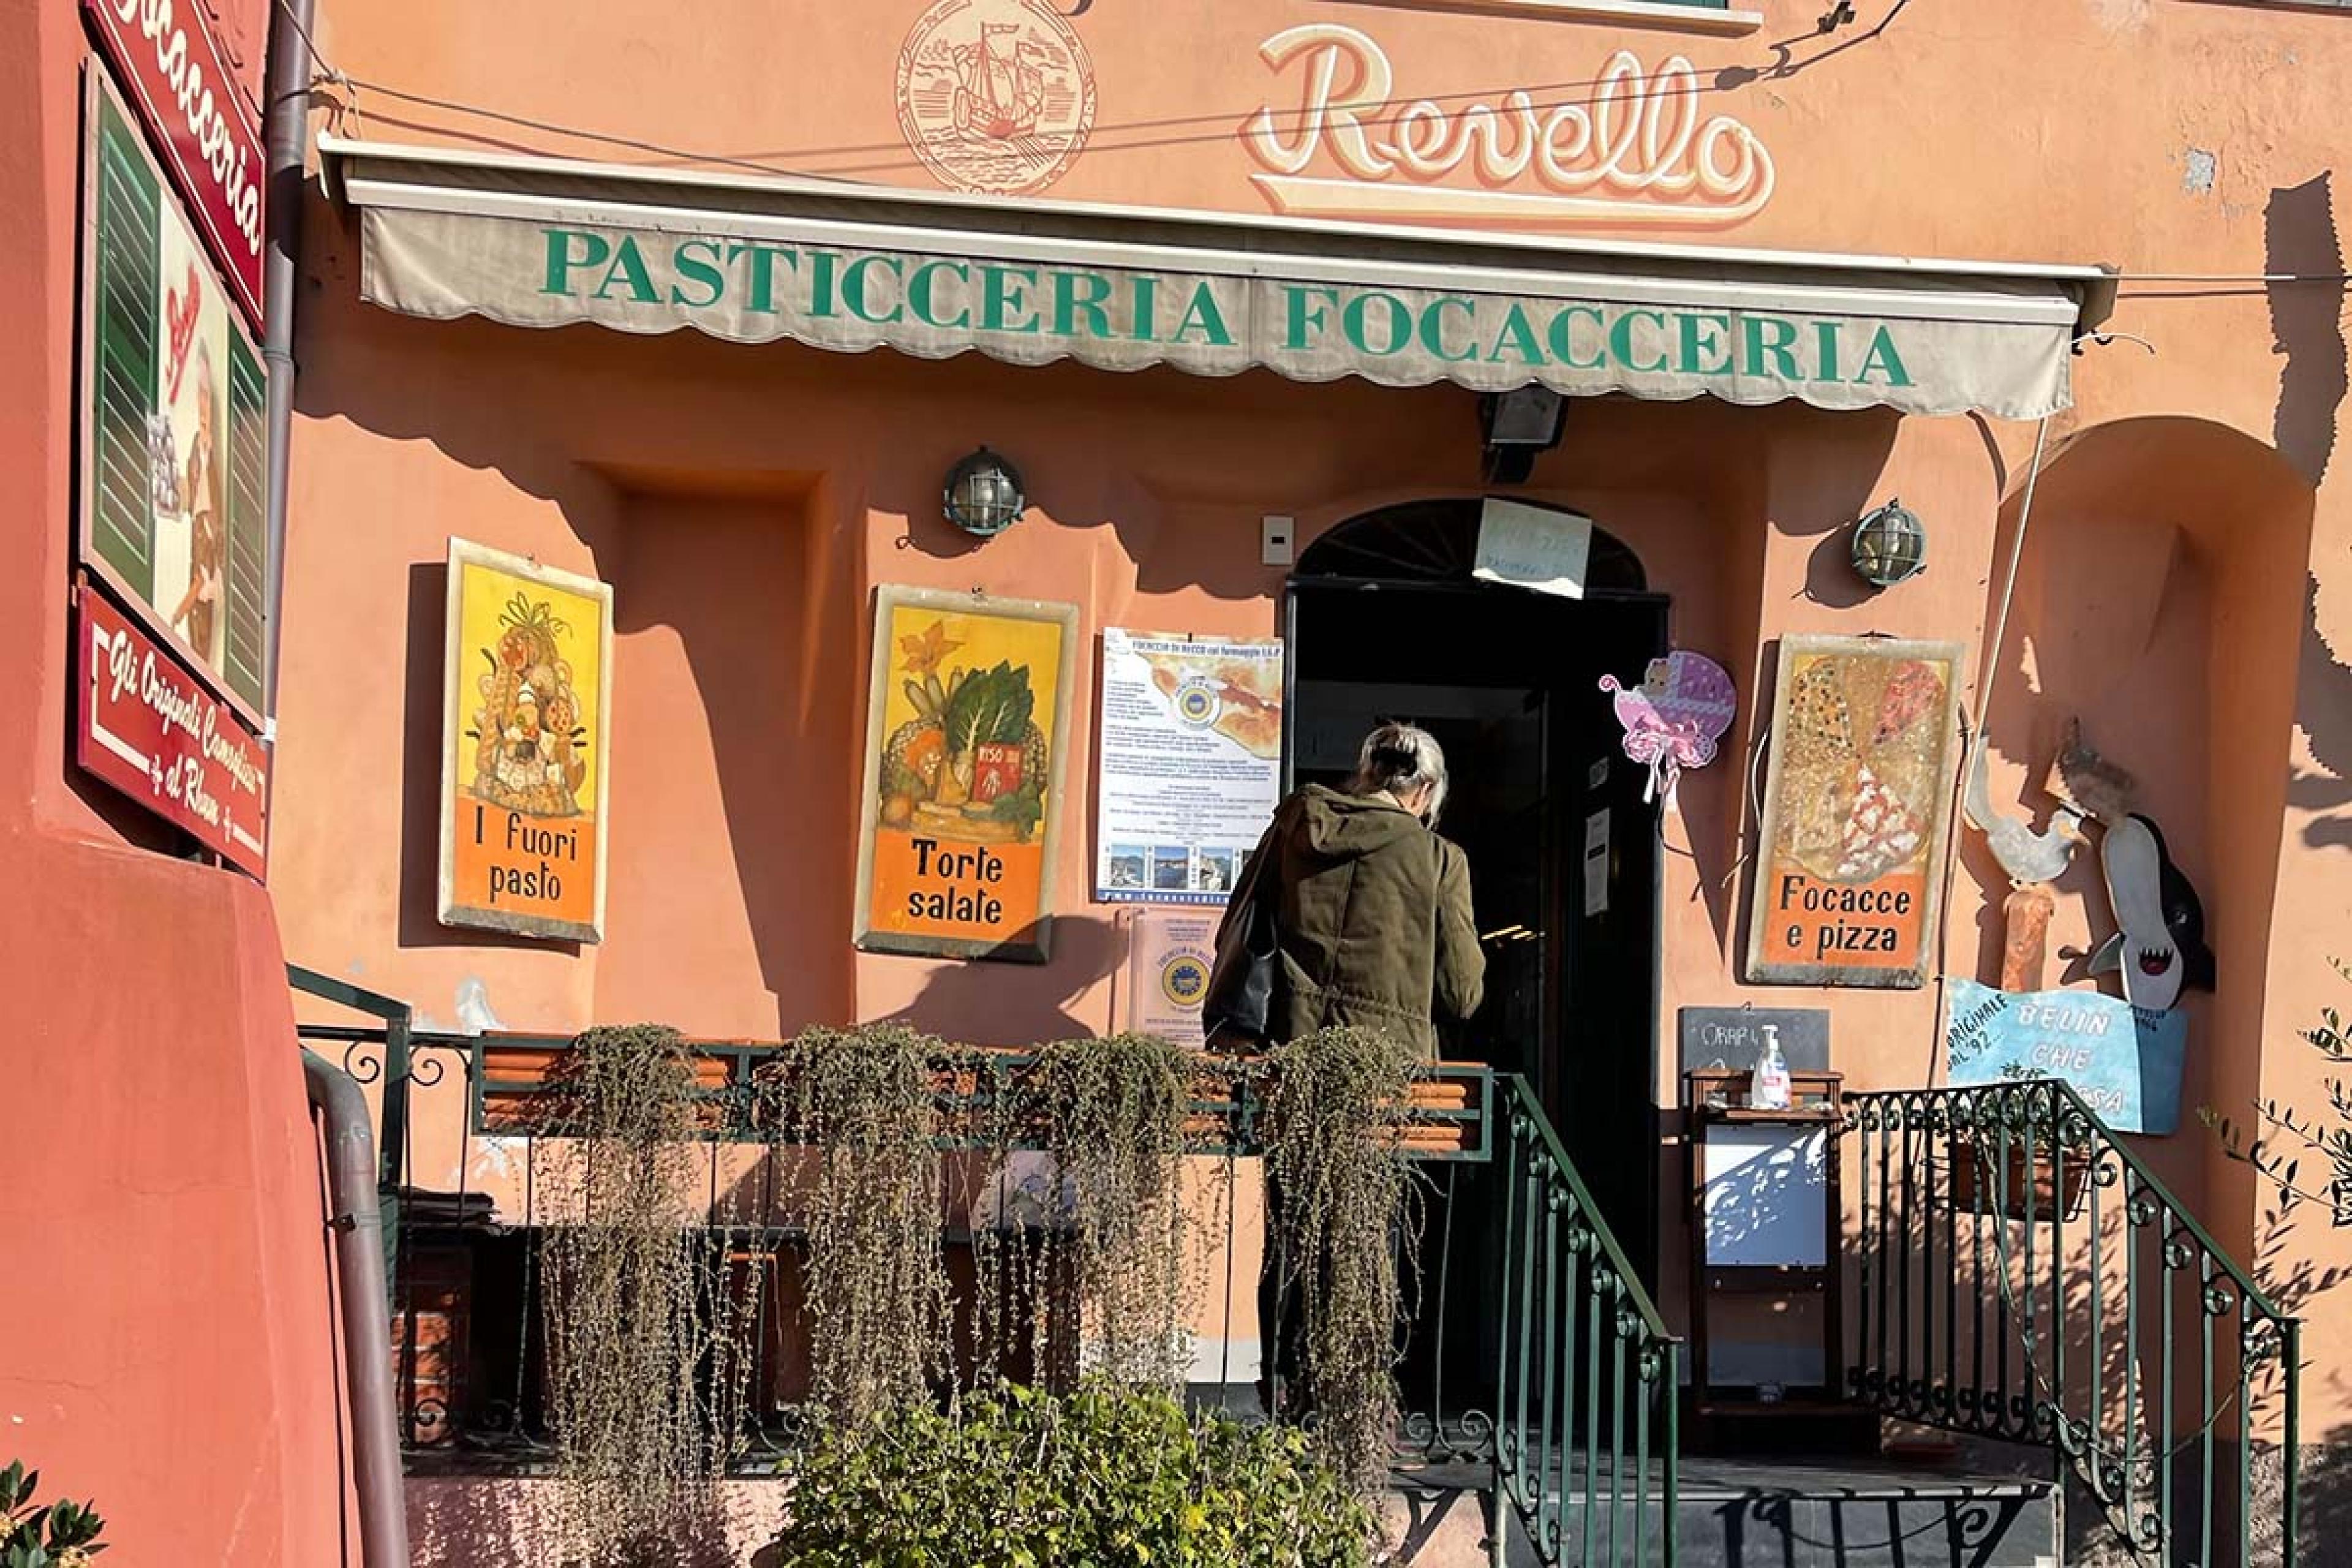 pink building with fringe that says Pasticceria Focacceria on it